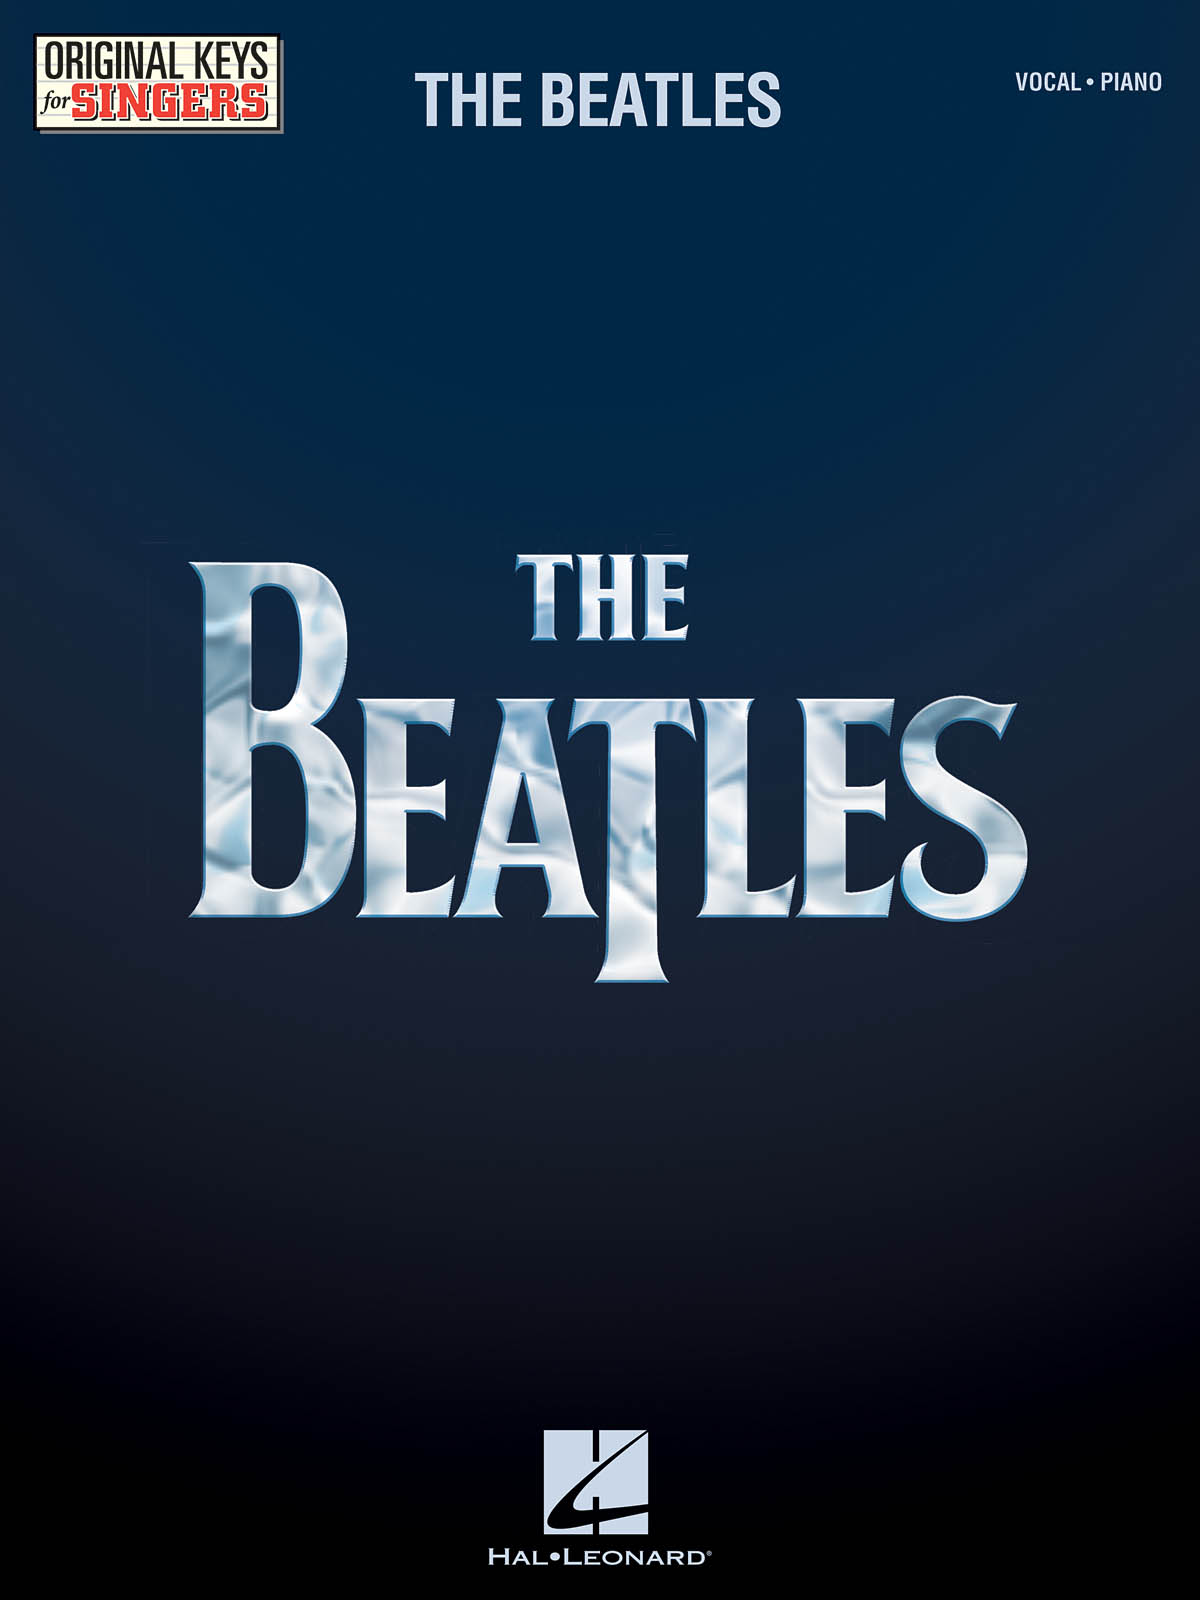 The Beatles: The Beatles - Original Keys for Singers: Vocal and Piano: Mixed